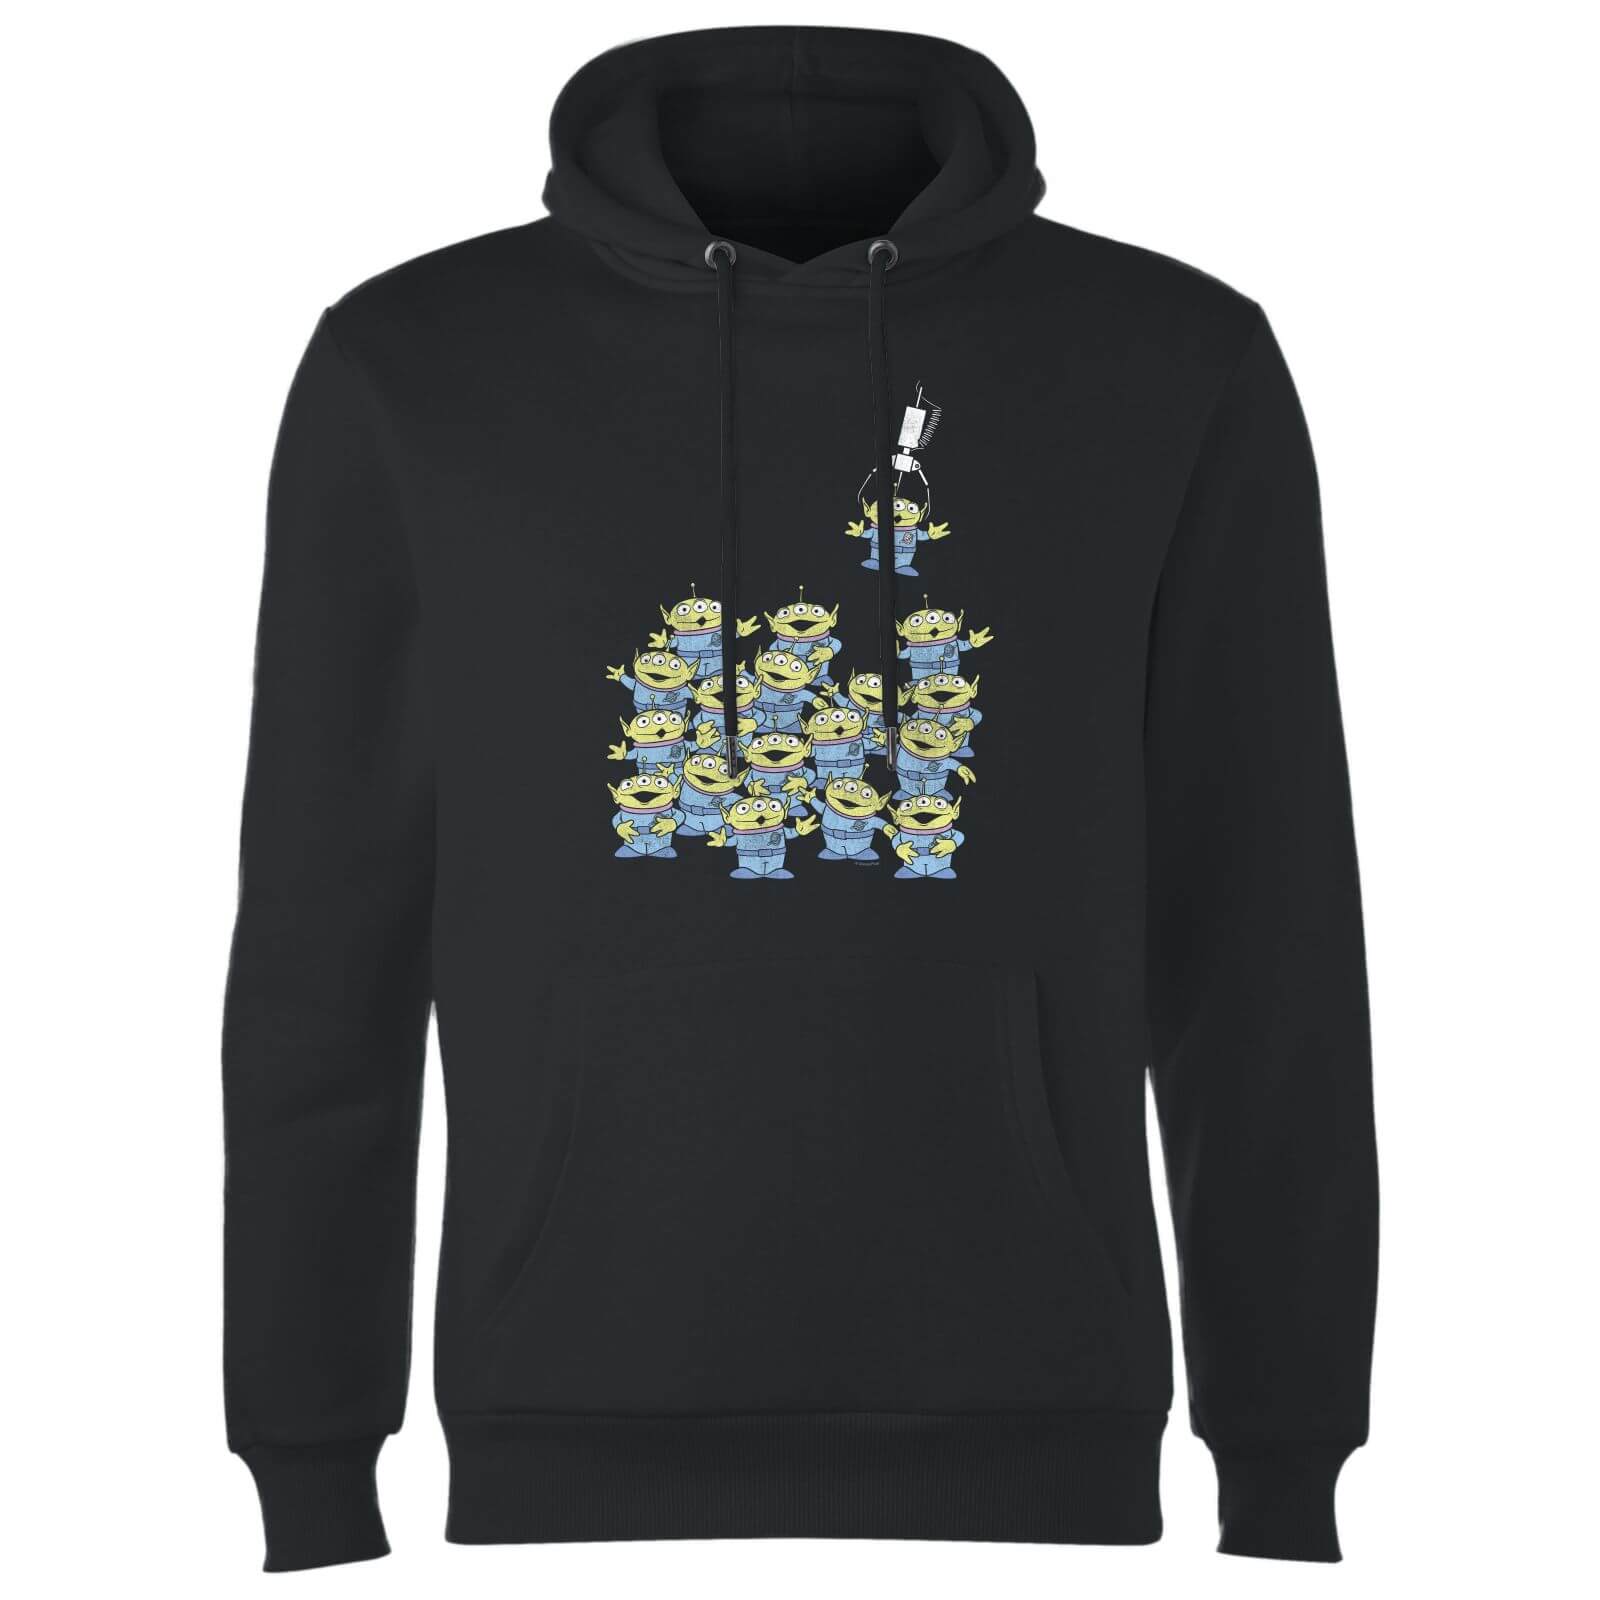 Toy Story The Claw Hoodie - Black - L